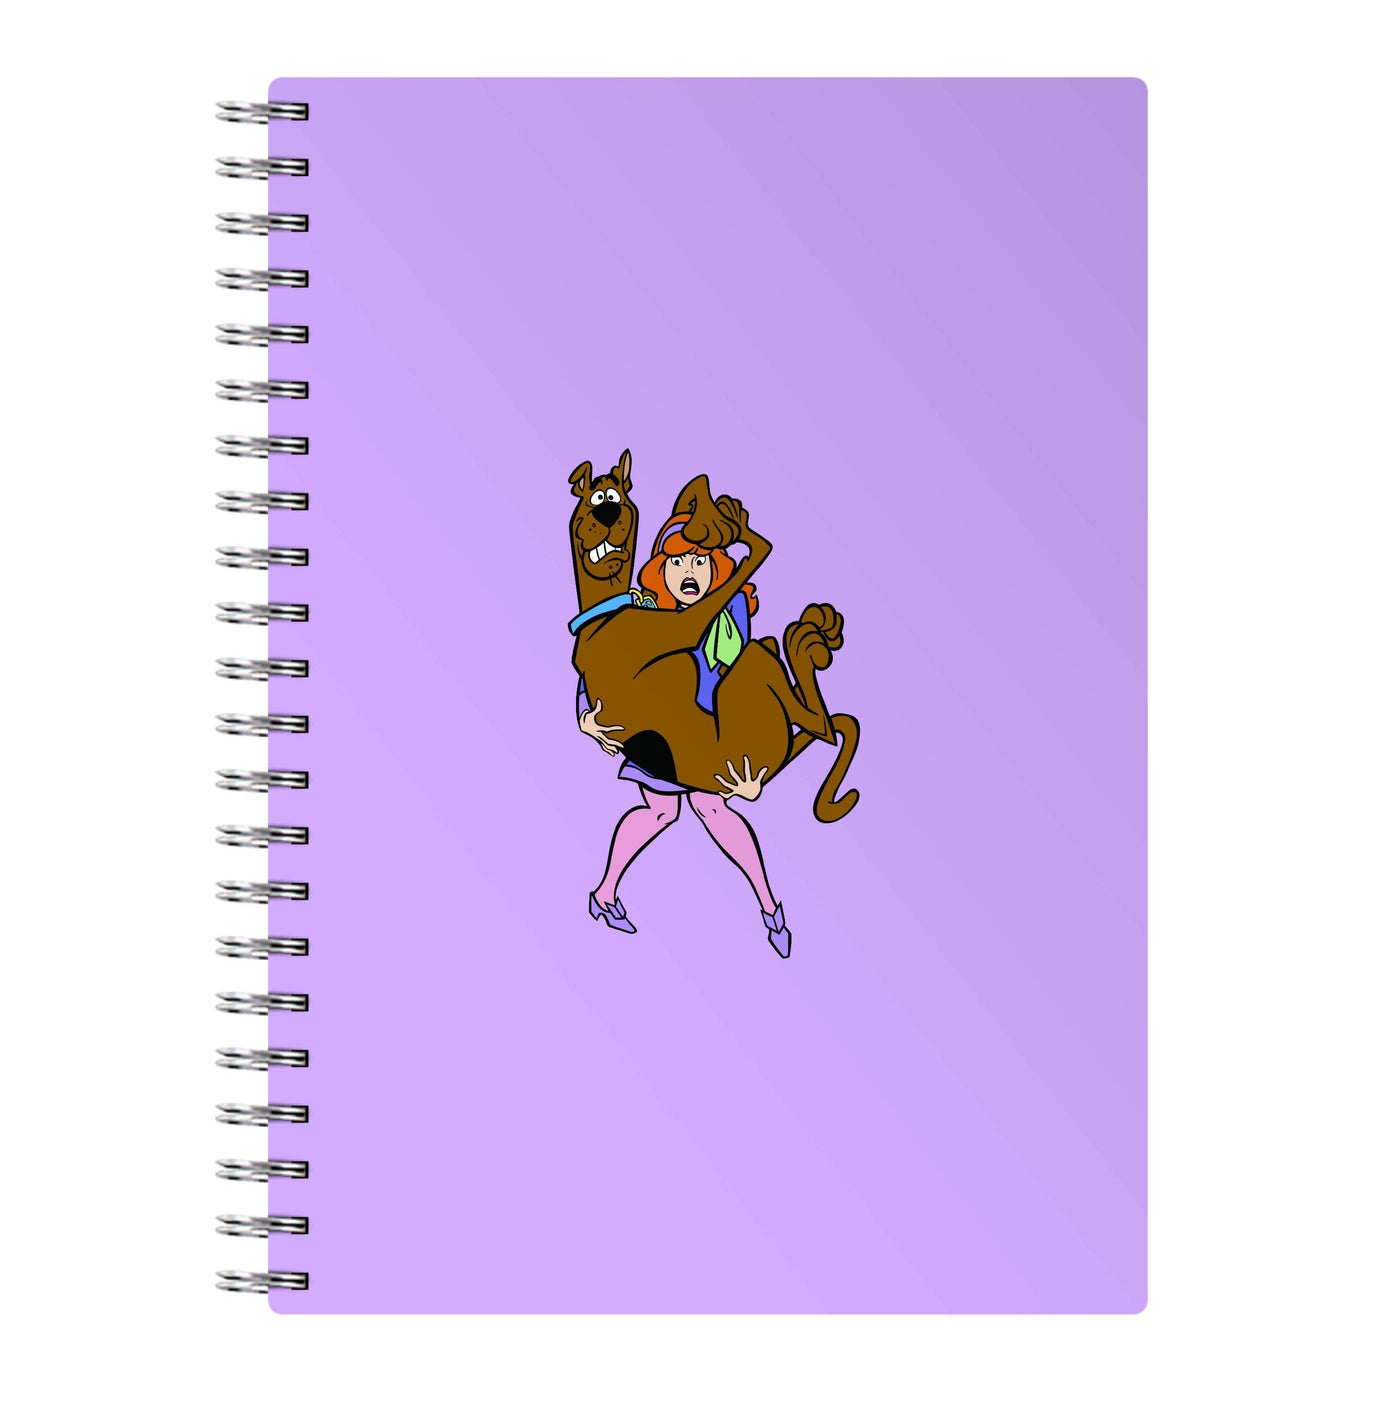 Scared - Scooby Doo Notebook